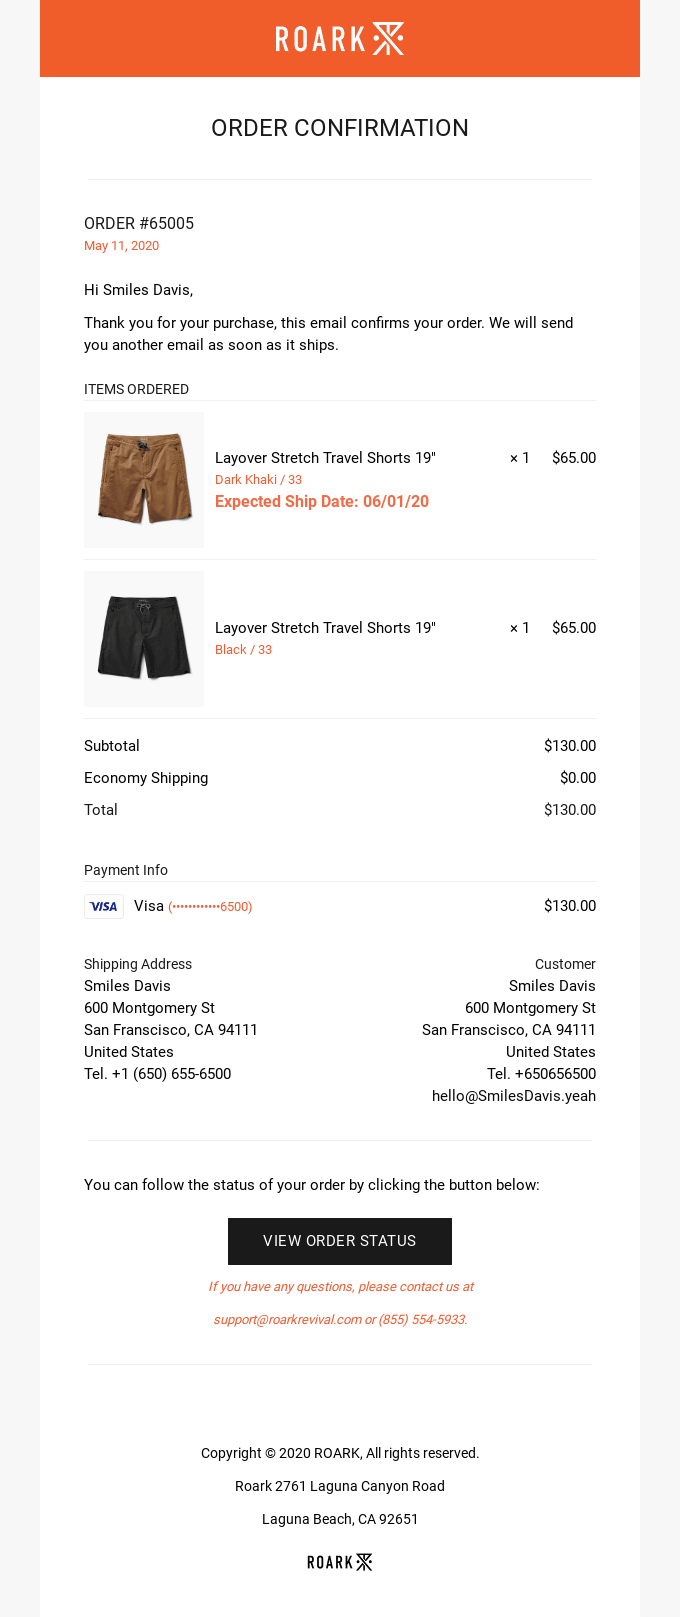 Roark order confirmation email example